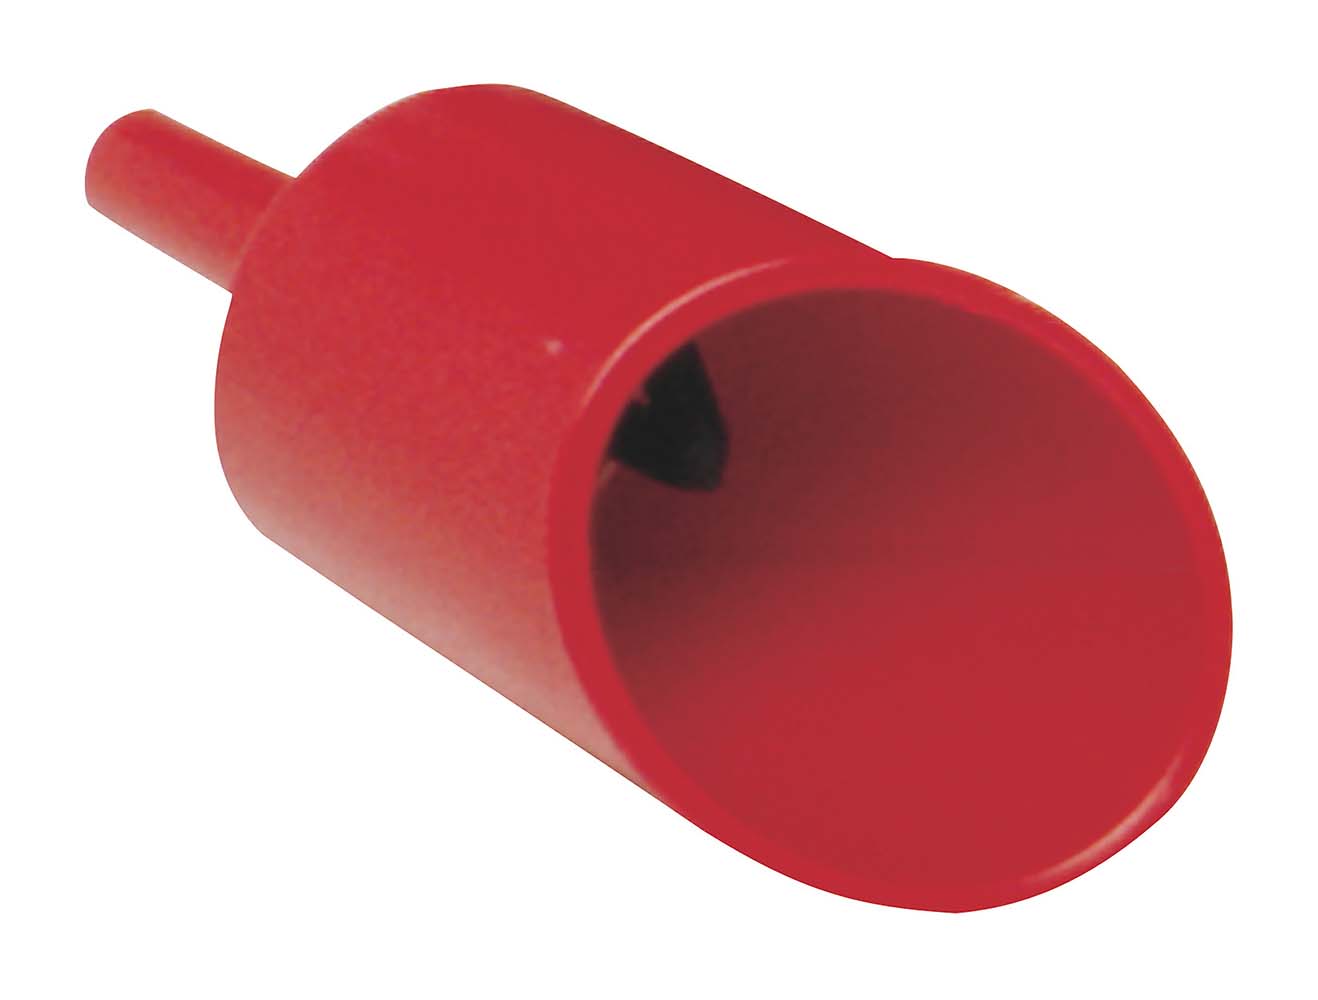 8901018 A practical filler funnel. This funnel is ideal for filling a petrol burner and lantern with ease. The funnel includes a filter for the prevention of impurities.